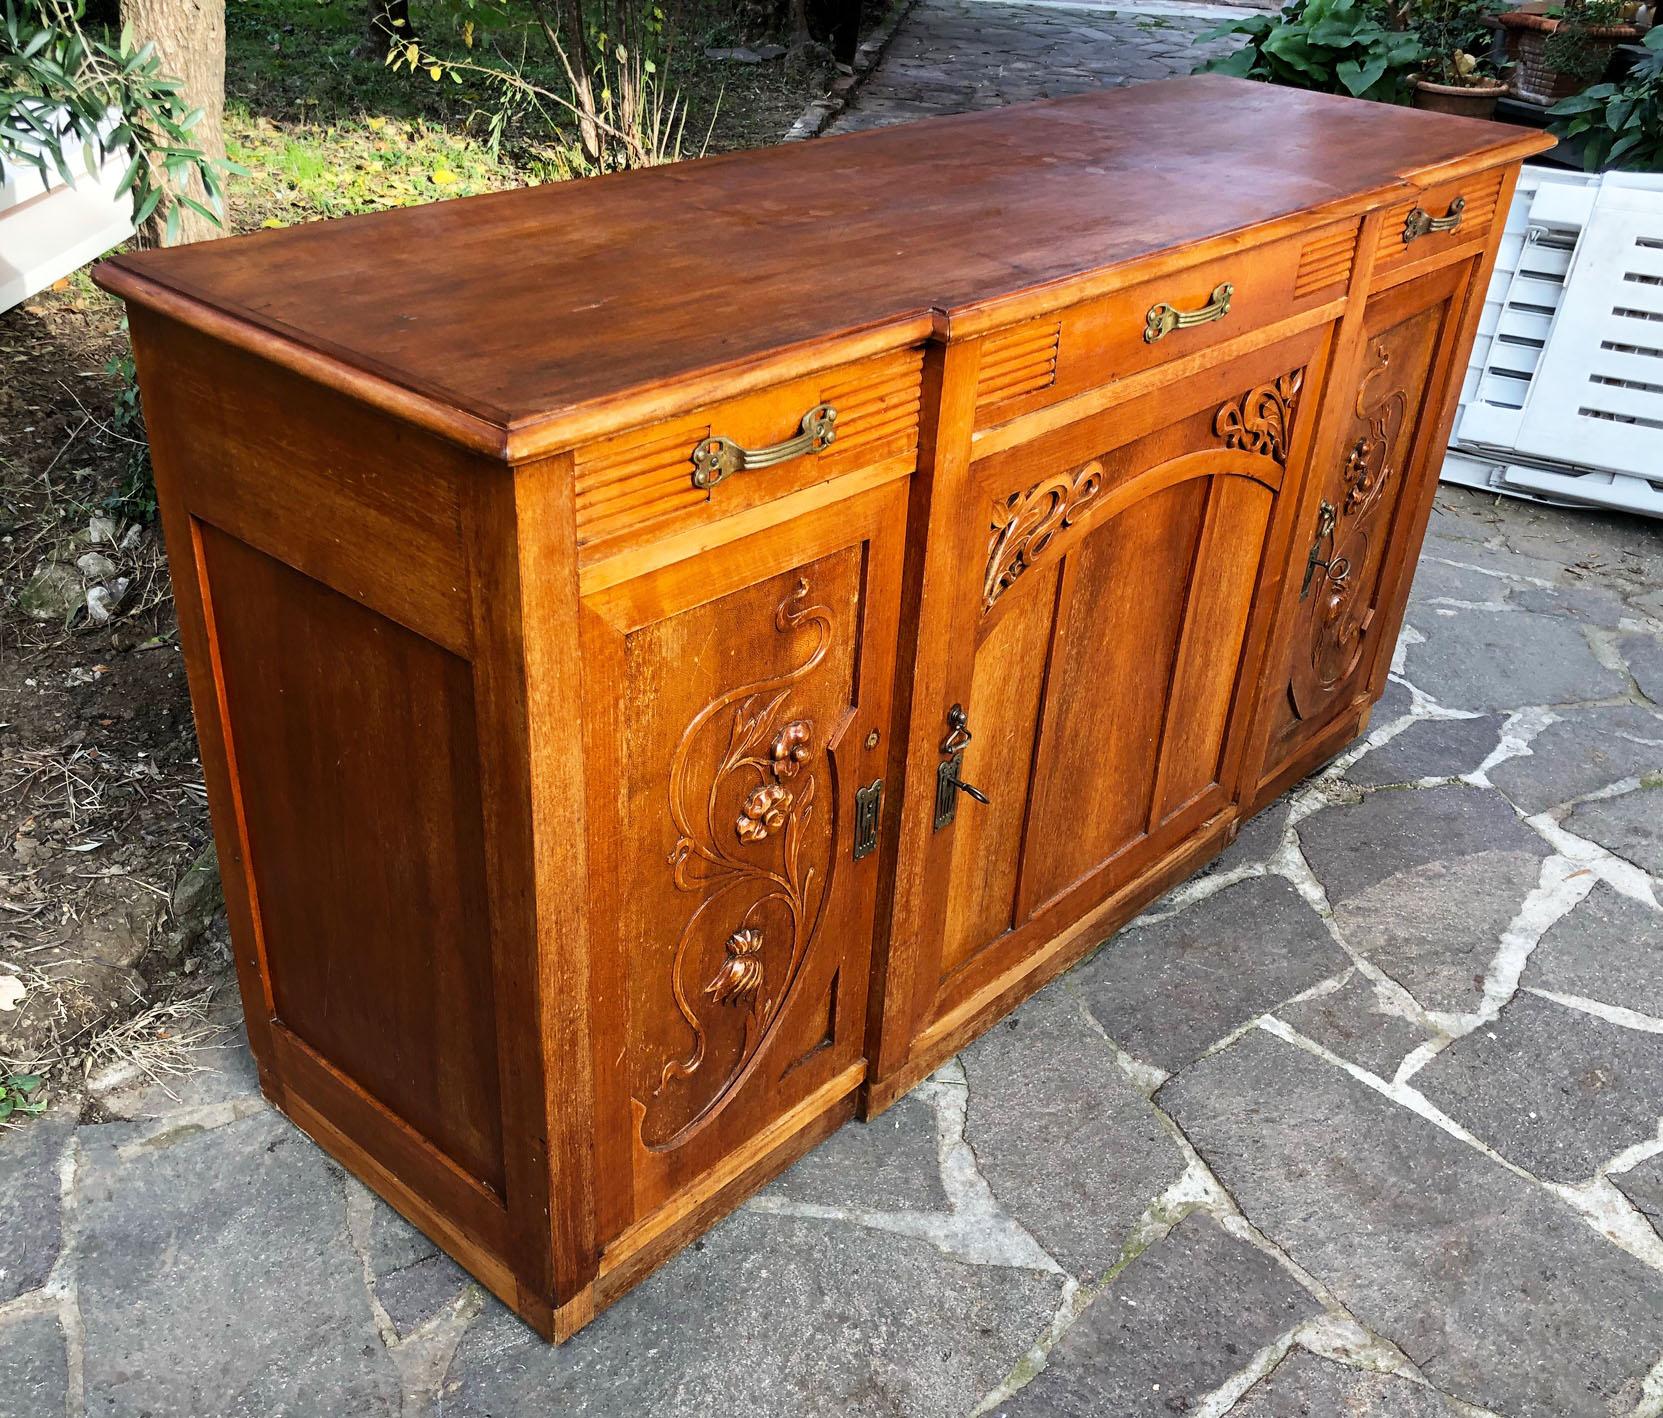 Original Italian Art Noveau Sideboard in Honey-Colored Walnut with Three Drawers For Sale 8